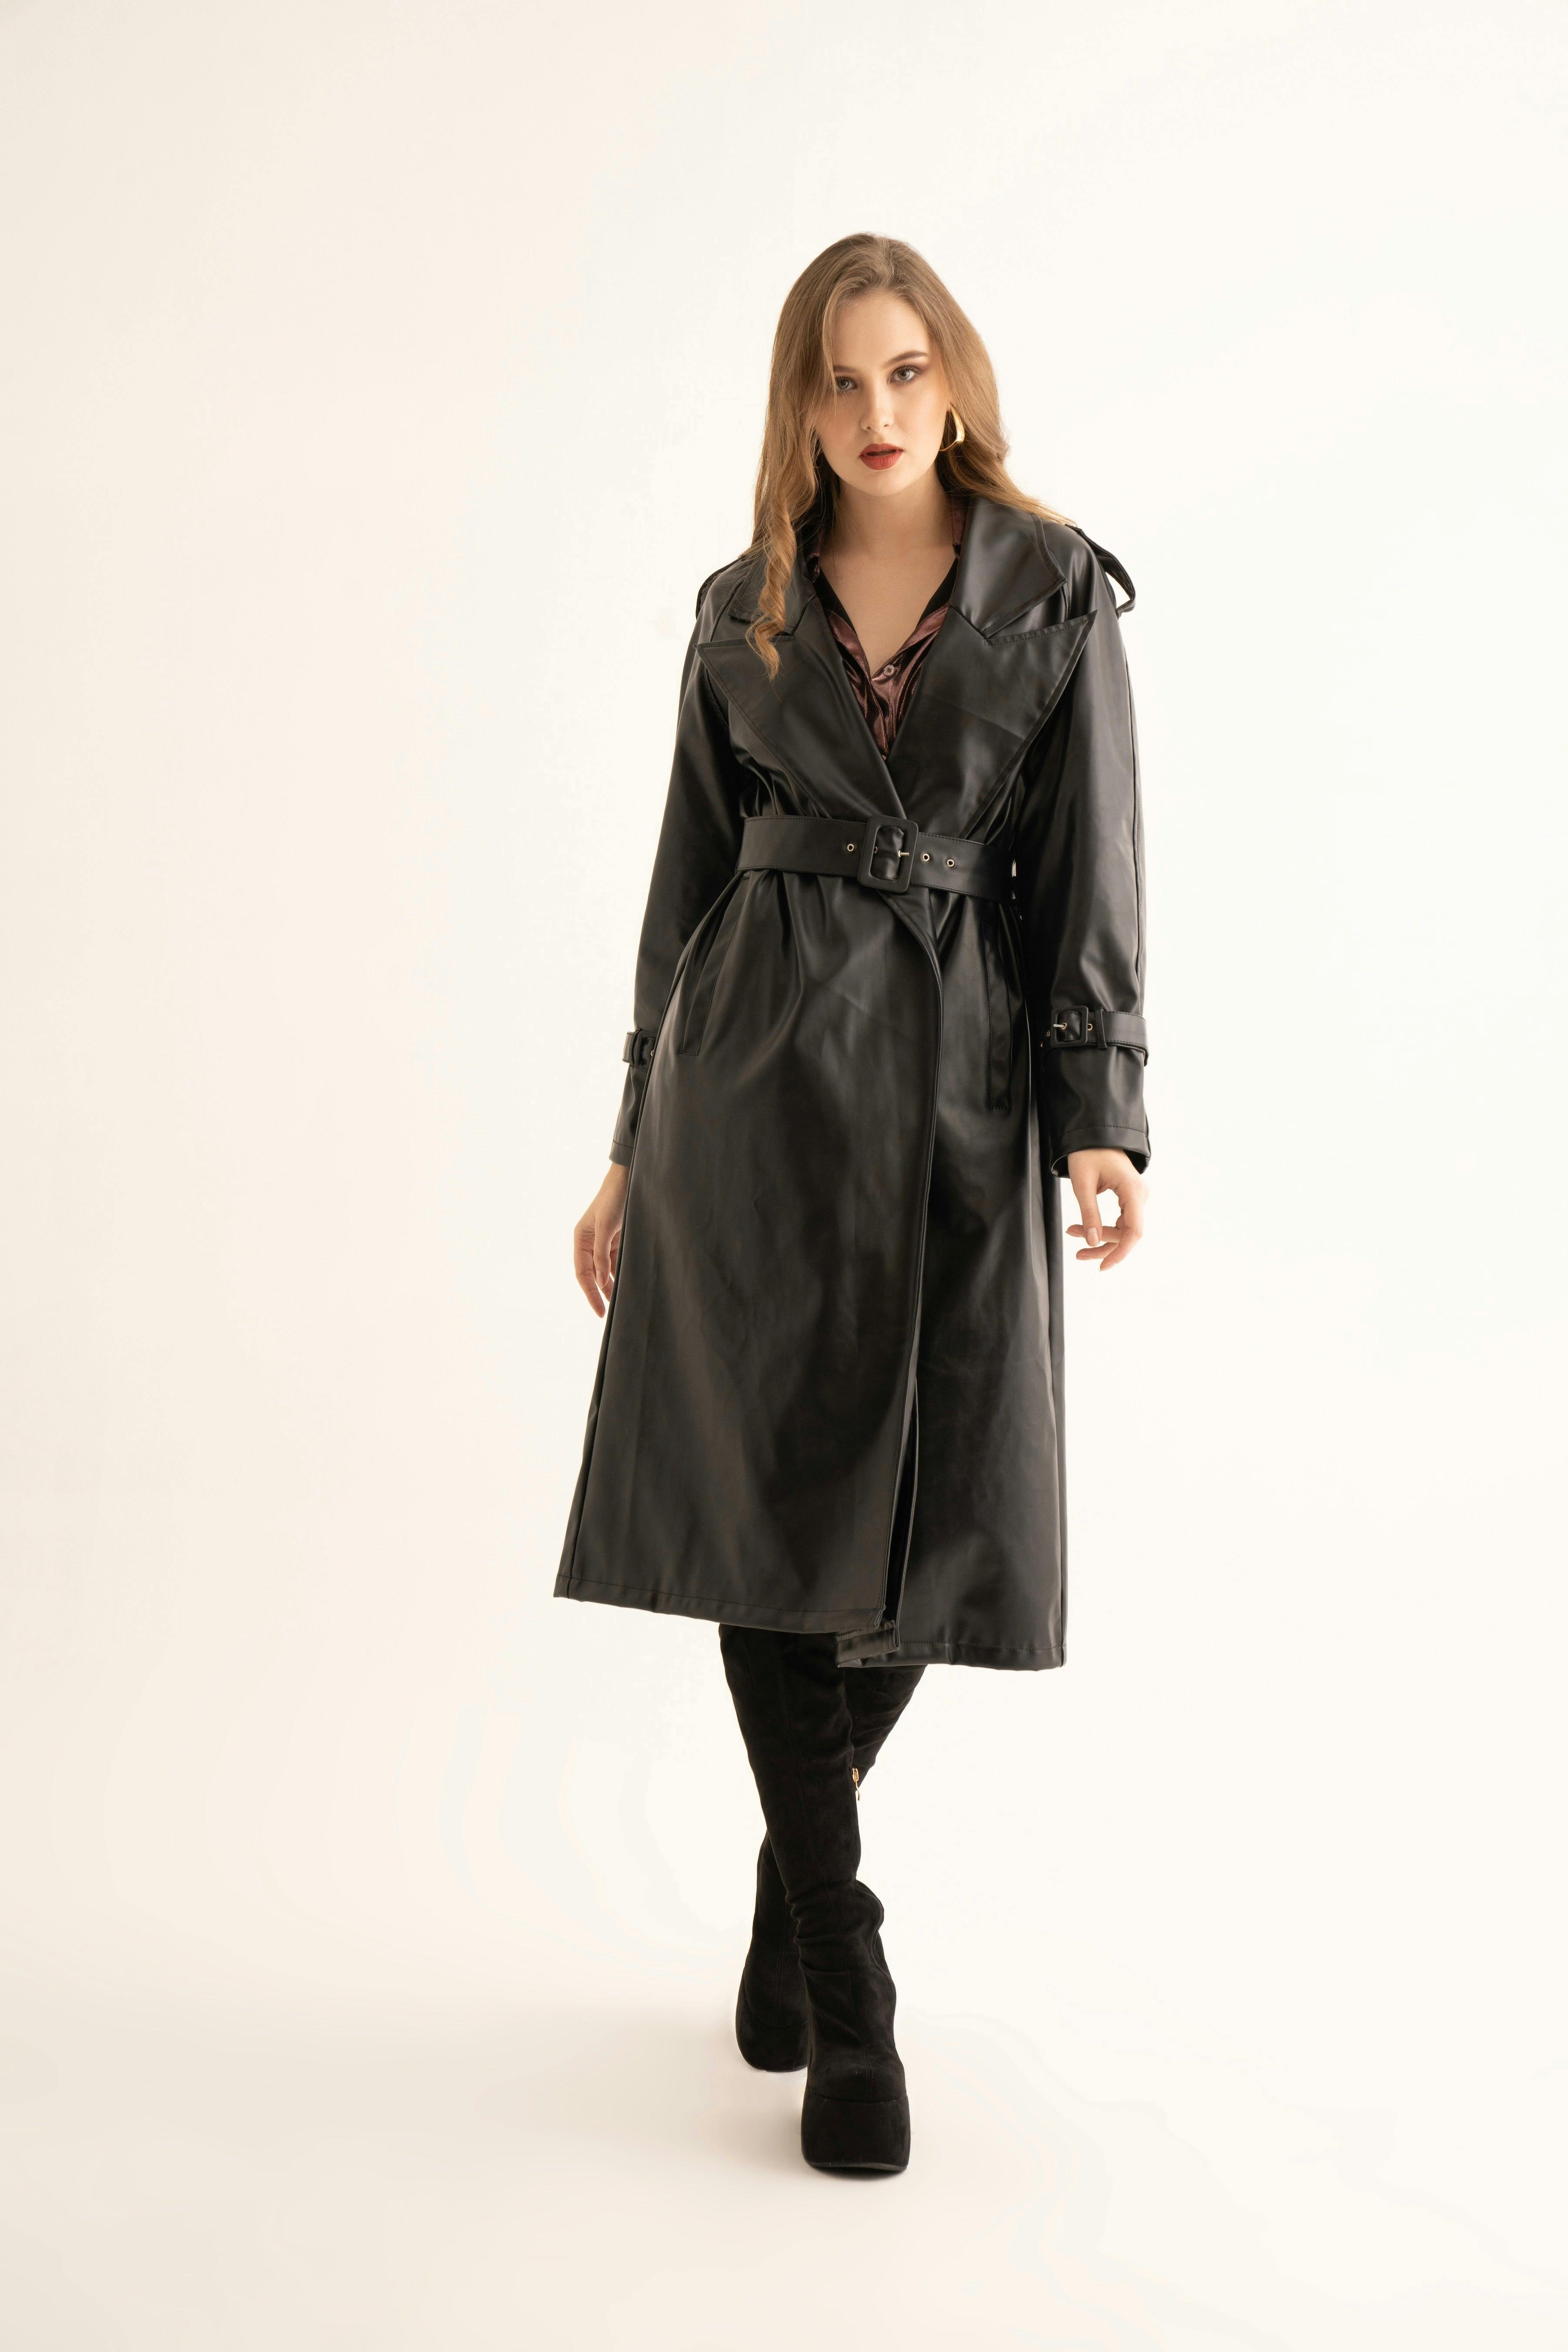 Black Faux Leather Trench, a product by Torqadorn